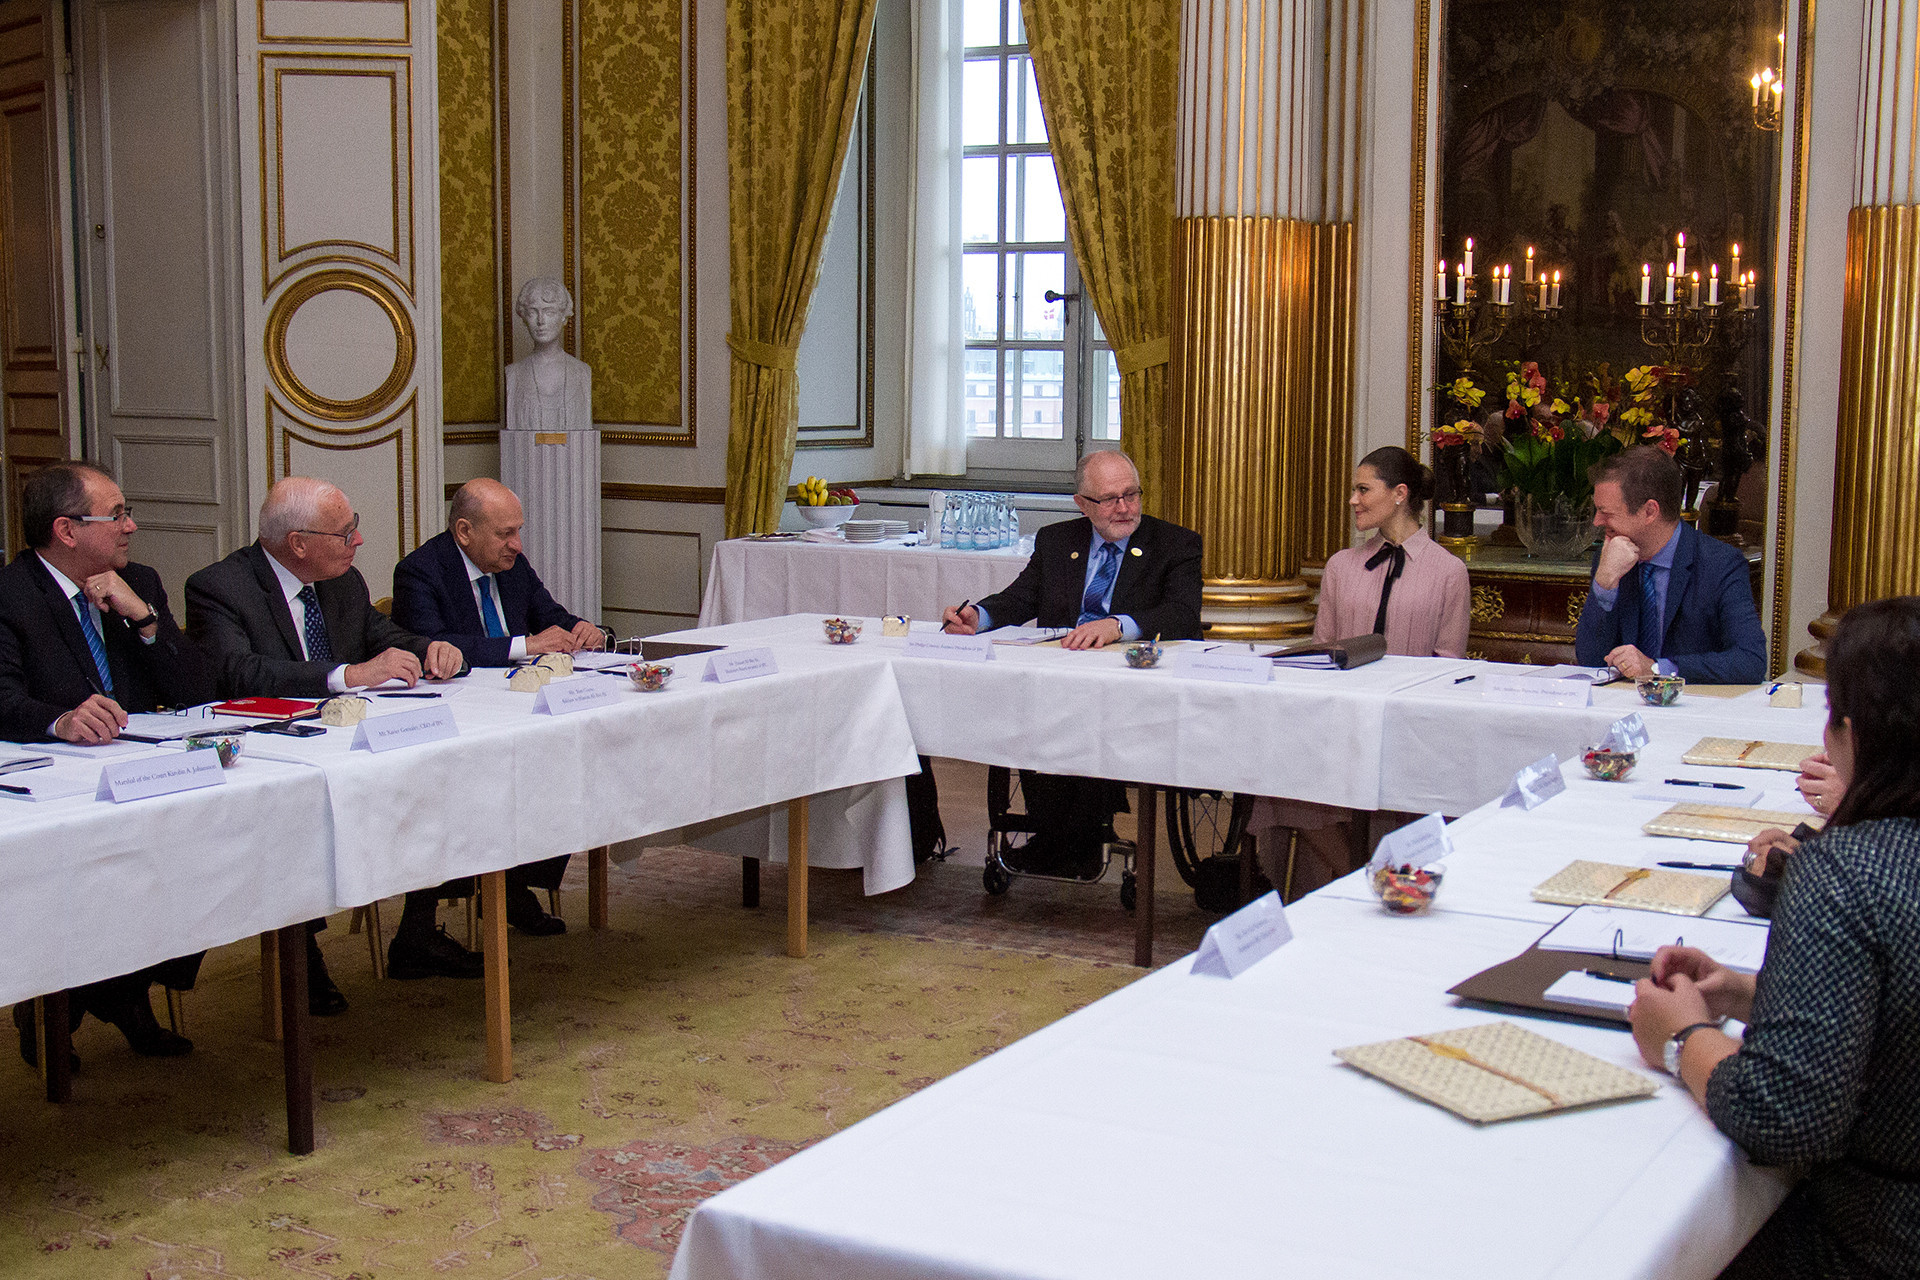 The biennial meeting of the Honorary Board of the International Paralympic Committee at the Royal Palace in Stockholm ©Royal Court, Sweden